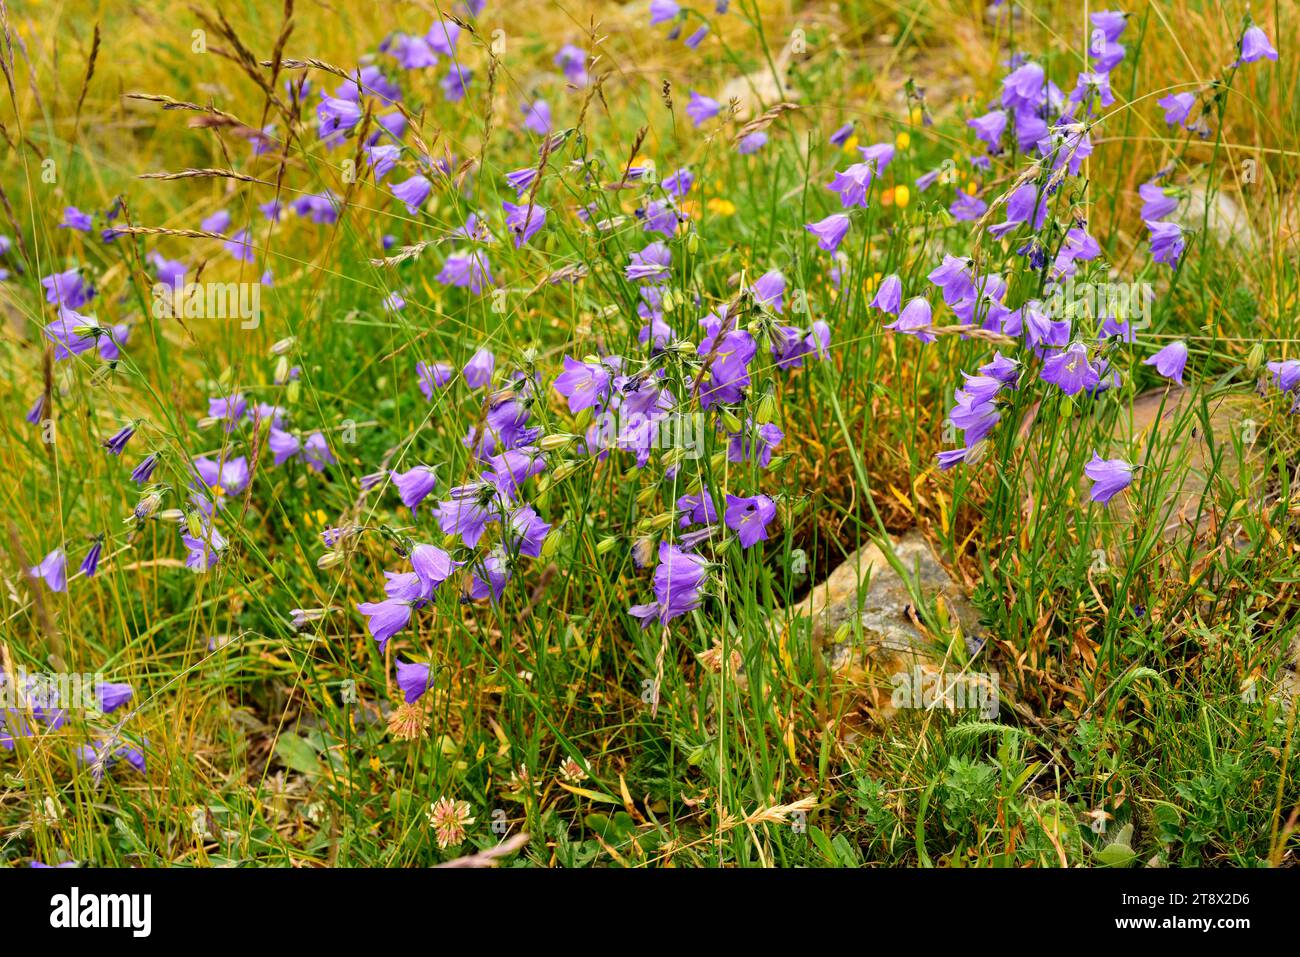 Harebell (Campanula rotundifolia) is a perennial herb native to Europe from the Pyrenees to Scandinavia. This photo was taken in Andorra. Stock Photo